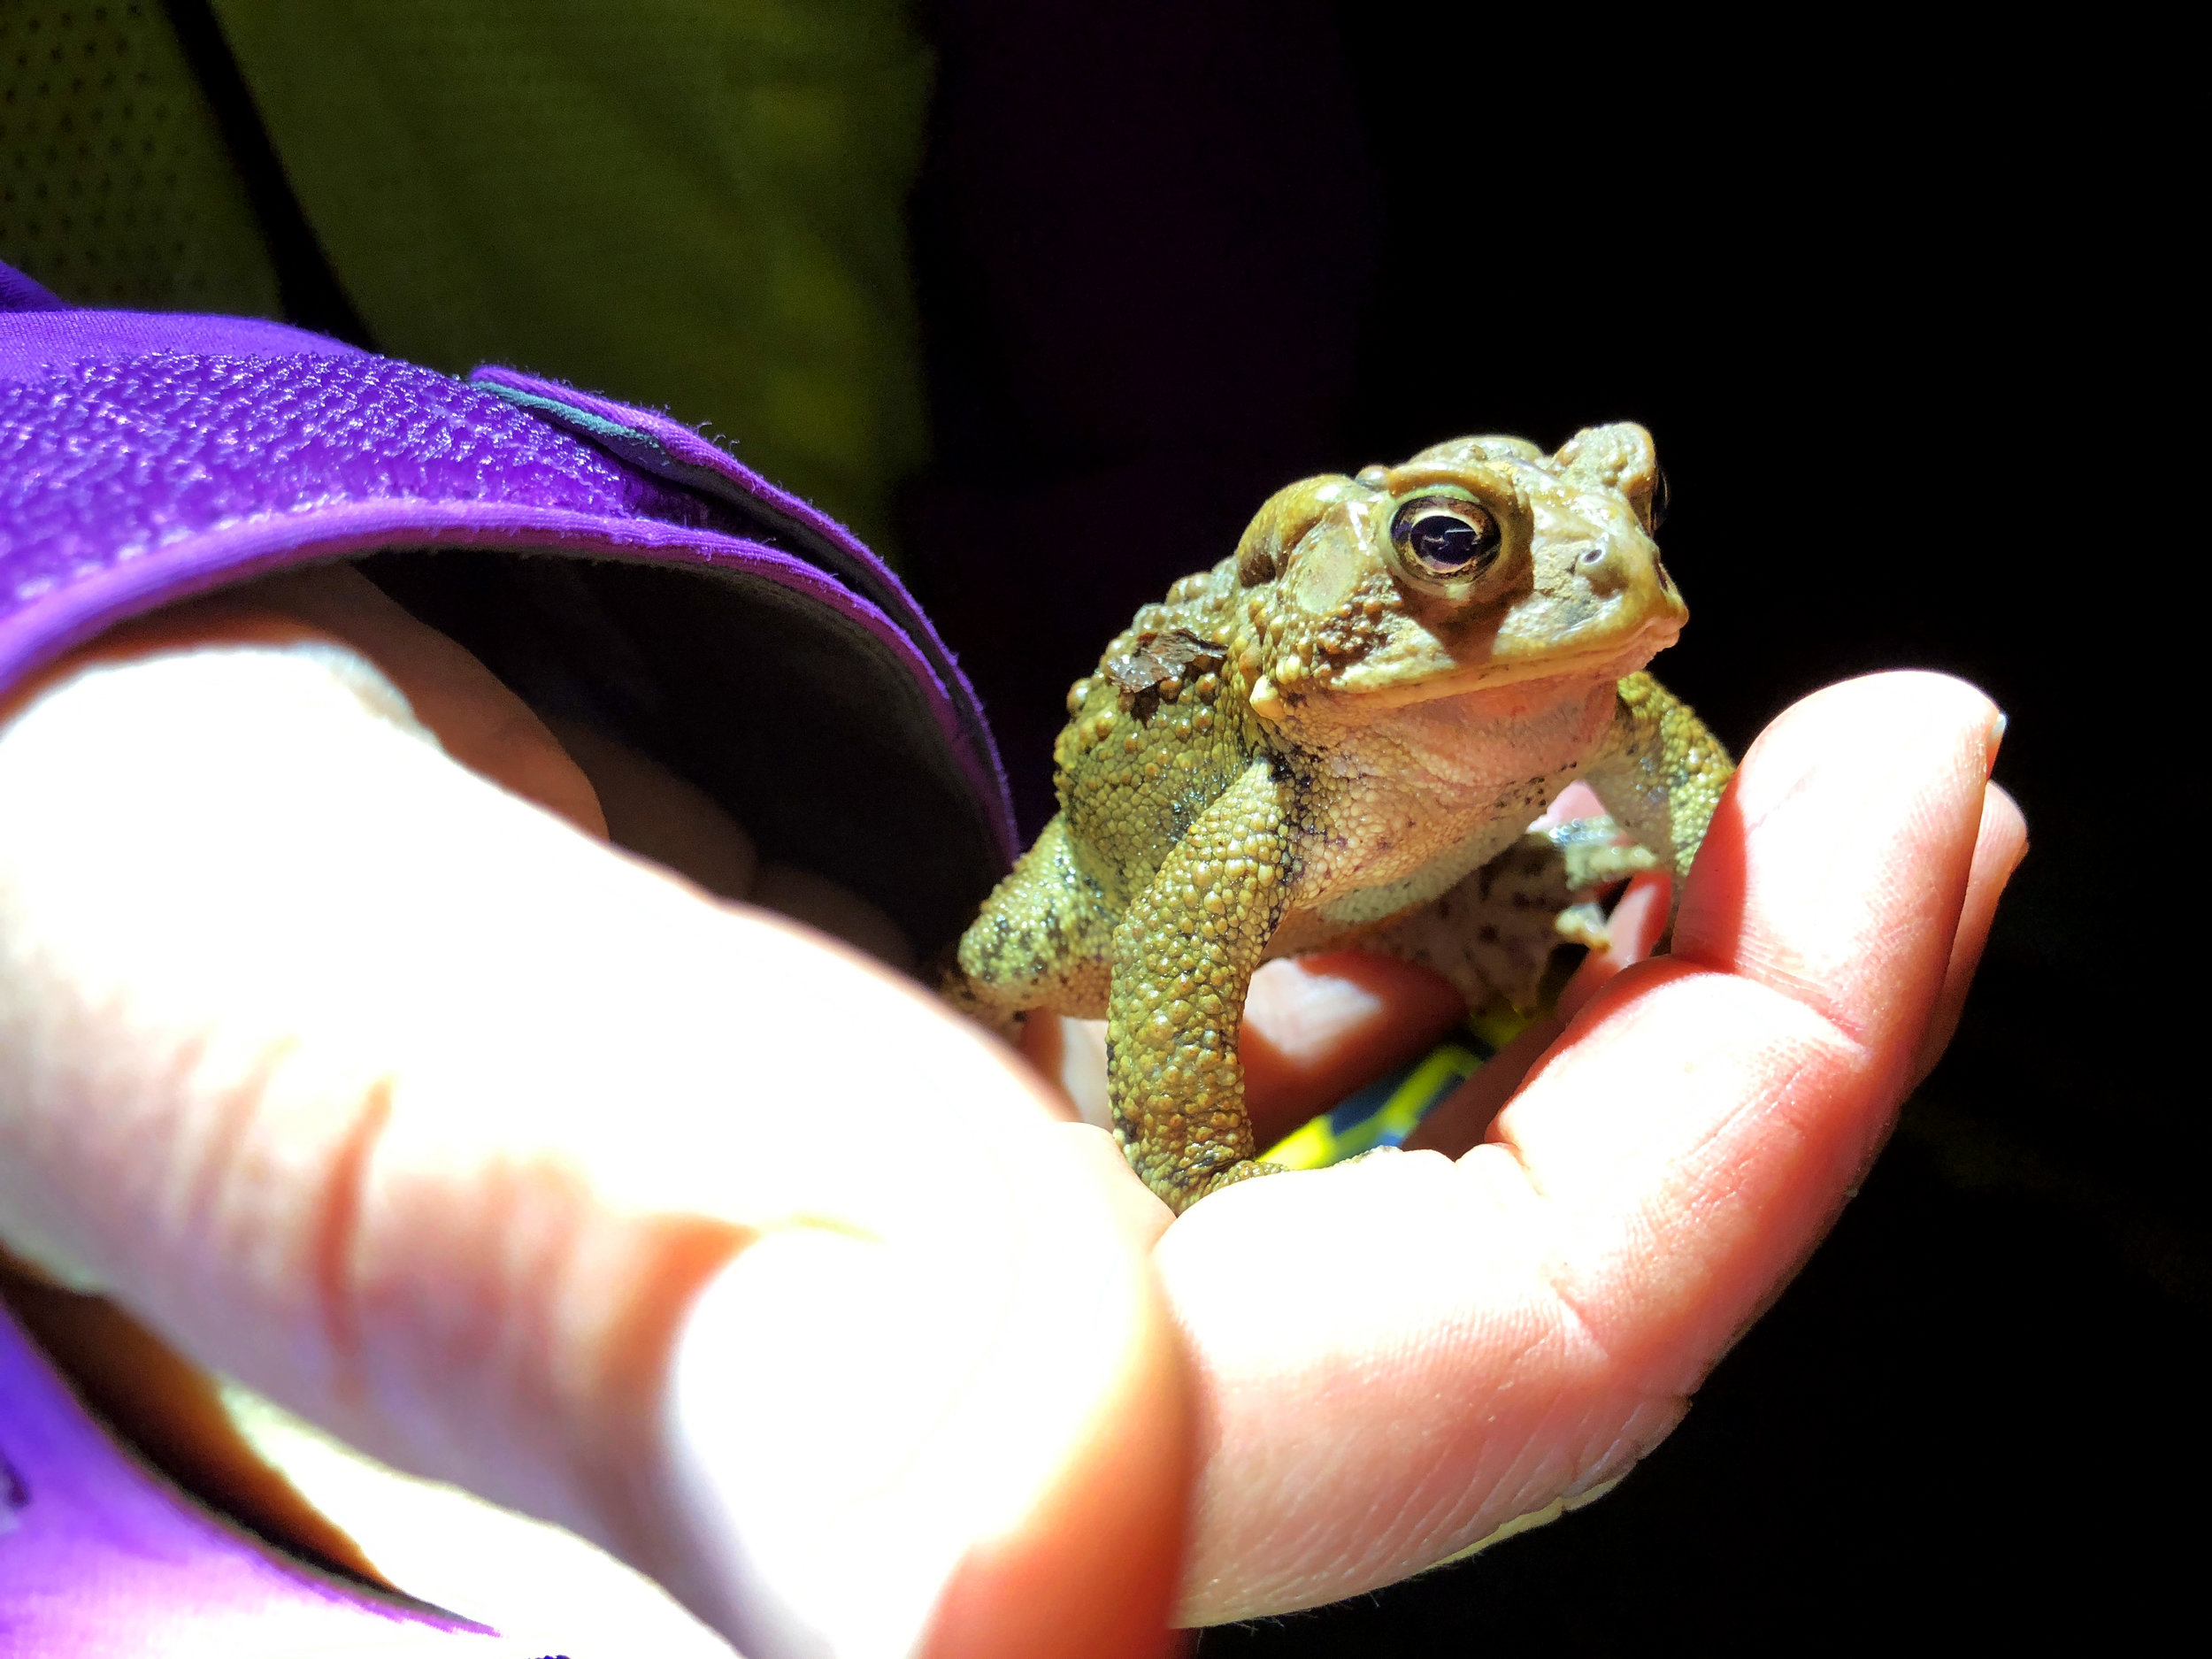  An American toad gets a lift from a Salamander Crossing Brigade volunteer. The small toad puffs himself up to look big and intimidating, an evolutionary defense mechanism designed to try to convince a predator that that they are too big to eat. (Ann